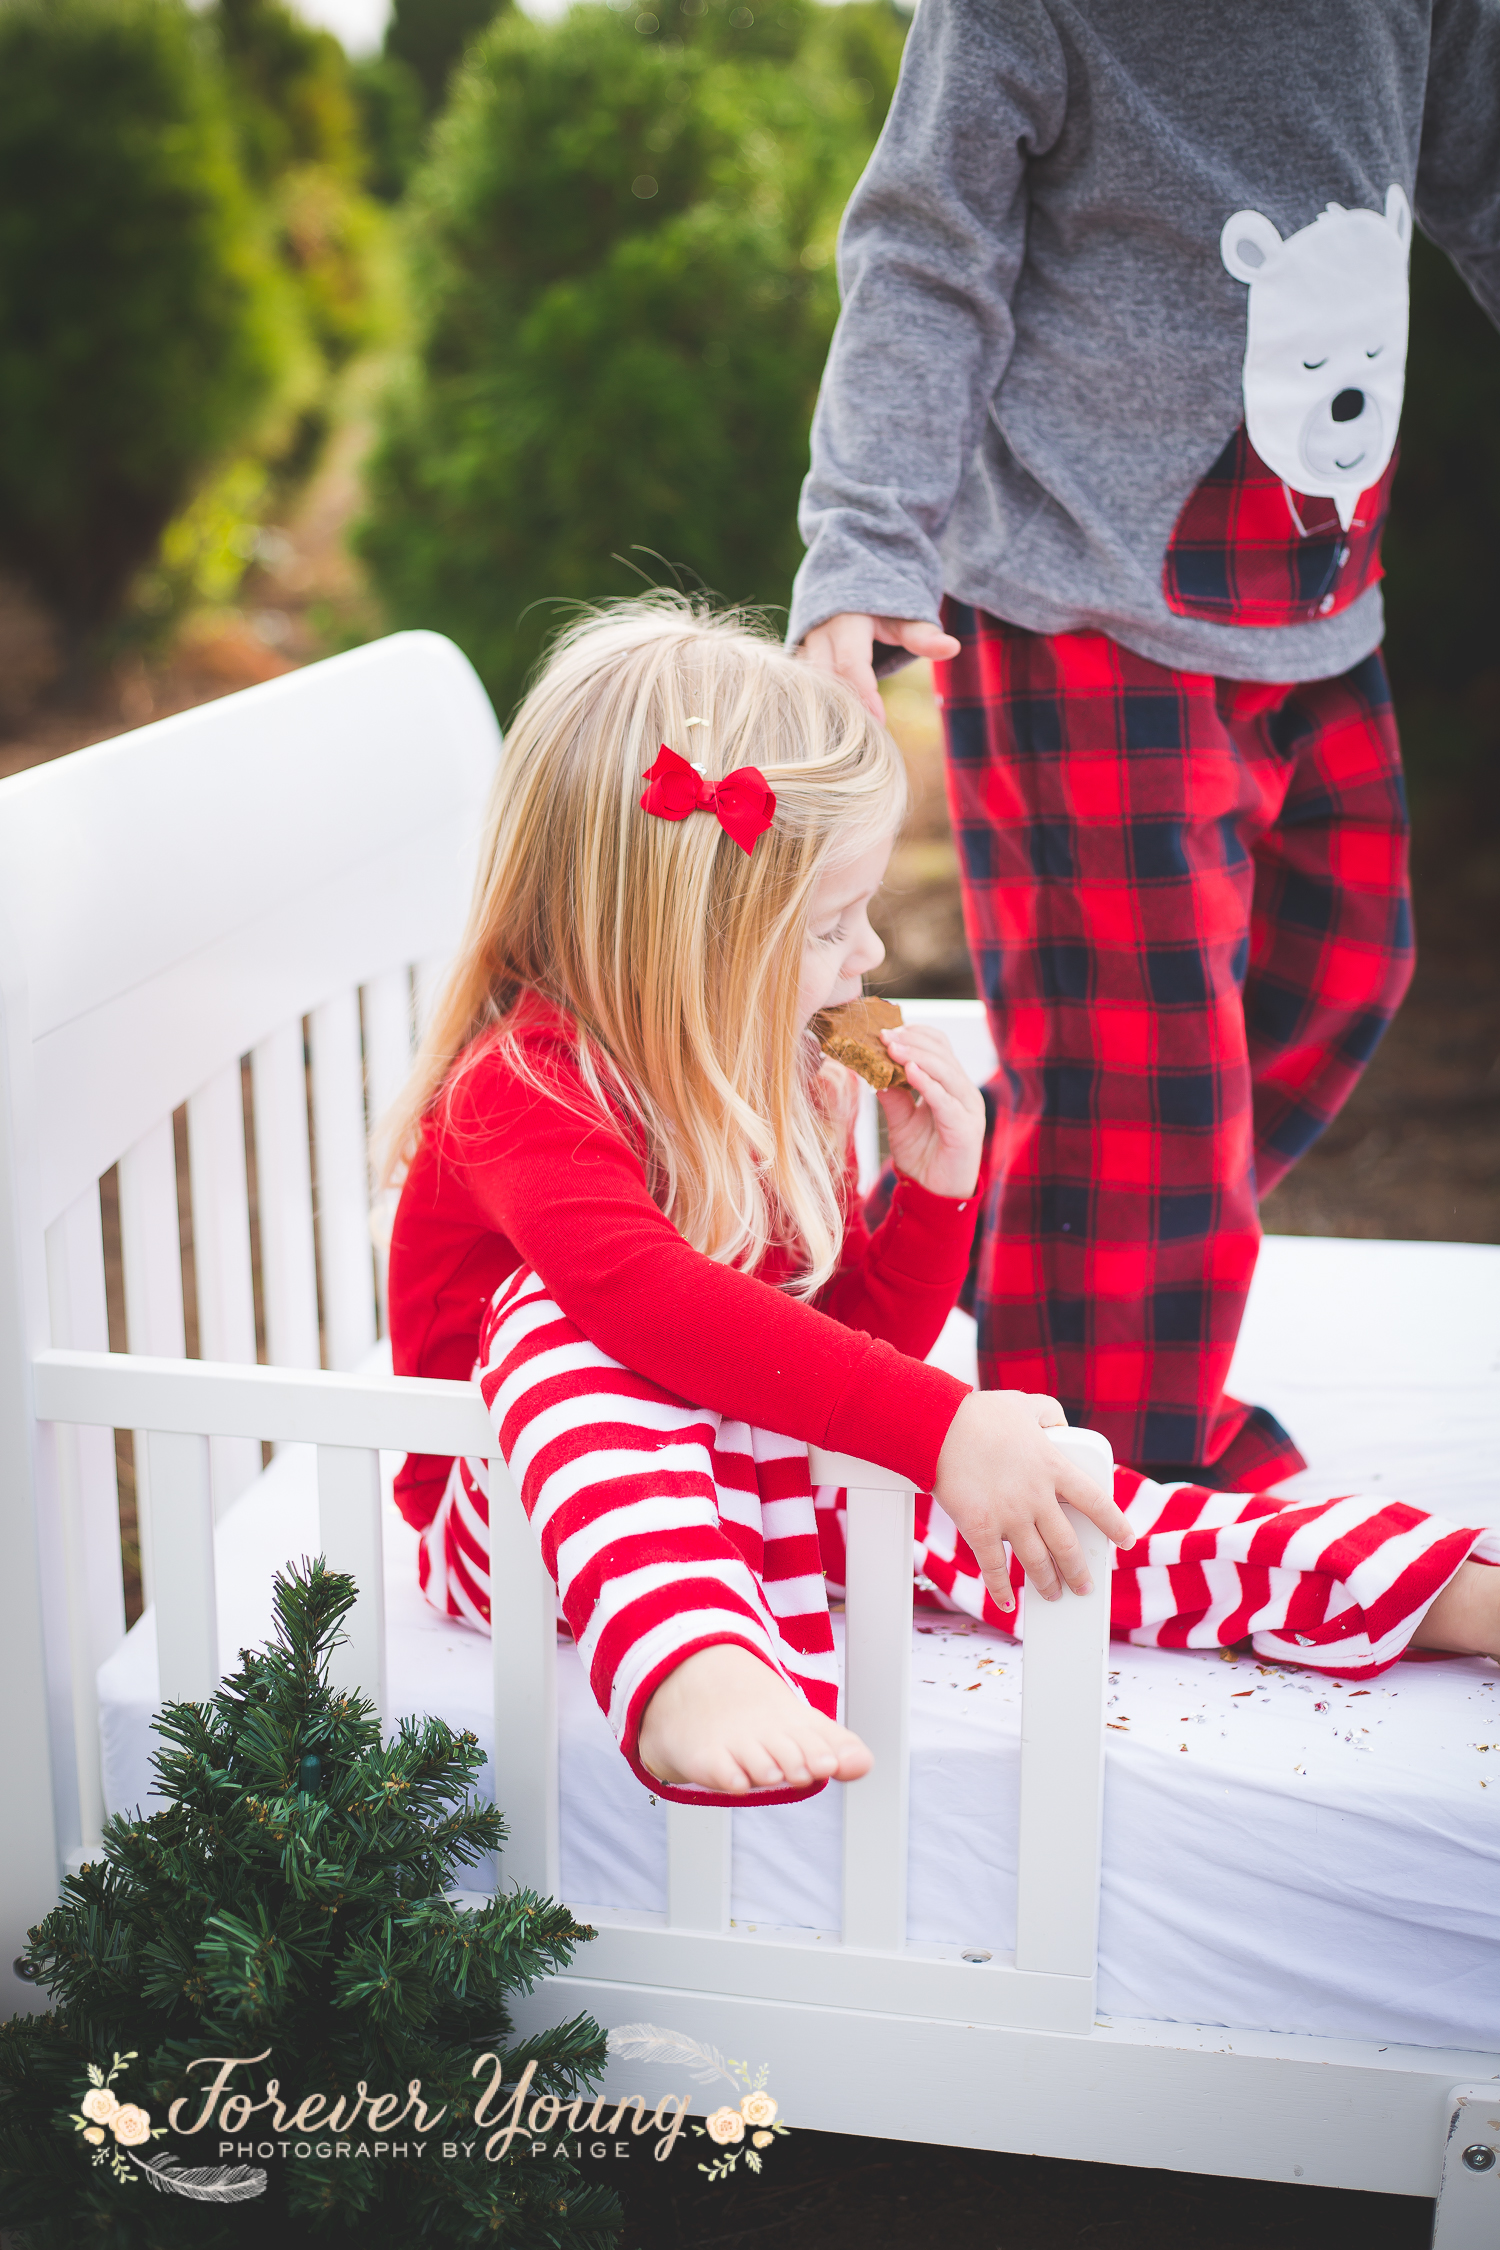 San Diego Christmas Tree Farm Photoshoot | Forever Young Photography By Paige-78